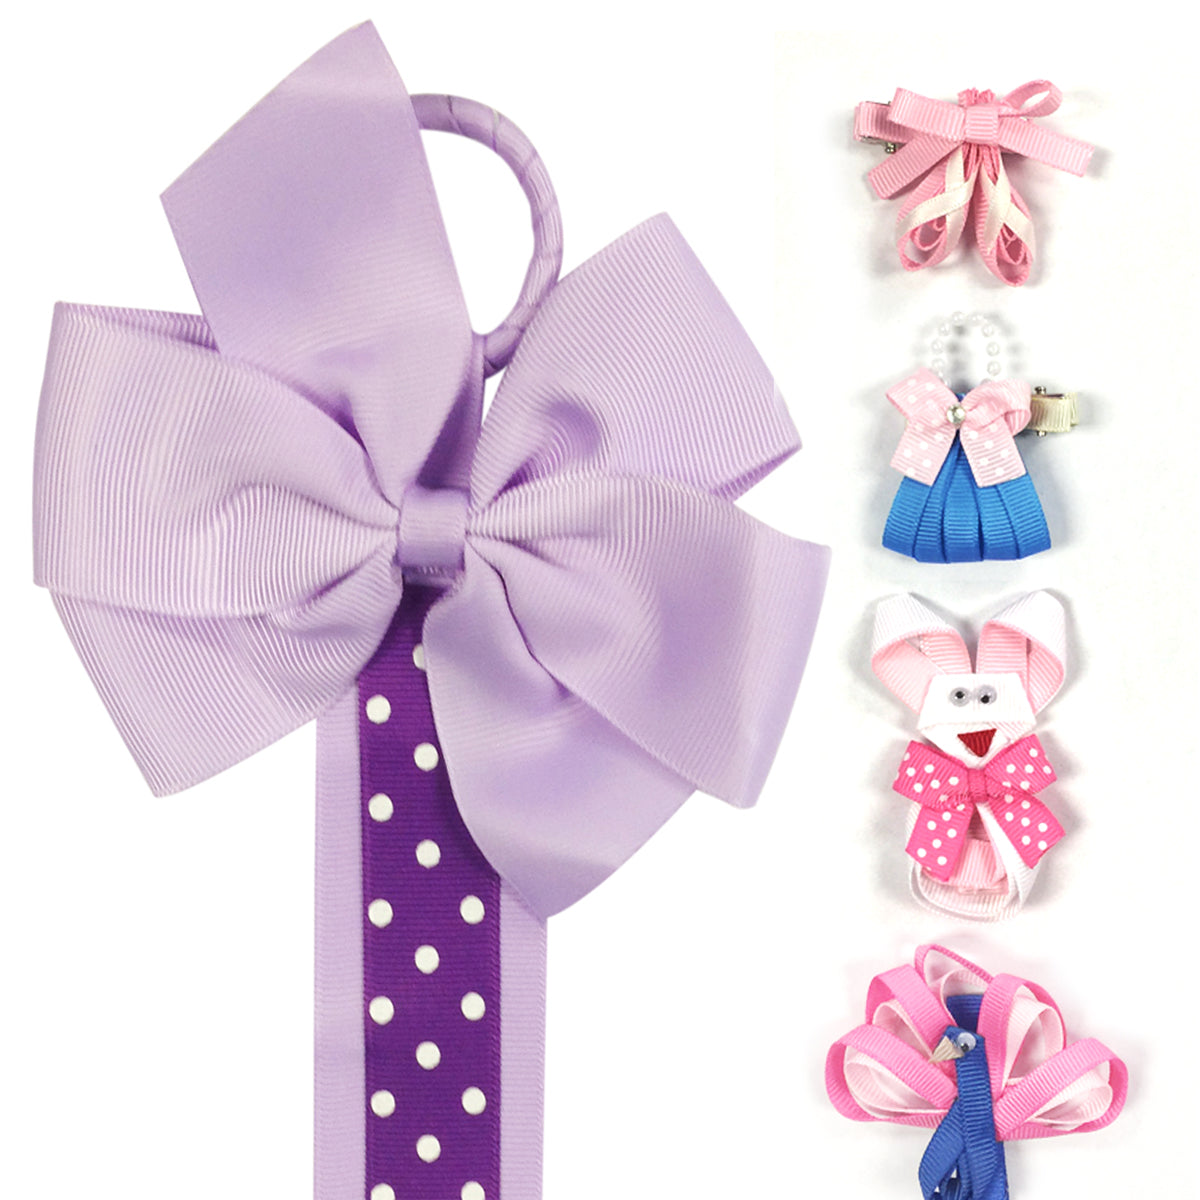 Wrapables Peacock, Bunny, Purse, Ballet Shoes Ribbon Sculpture Hair Clips with Polka Dots Hair Clip / Hair Bow Holder